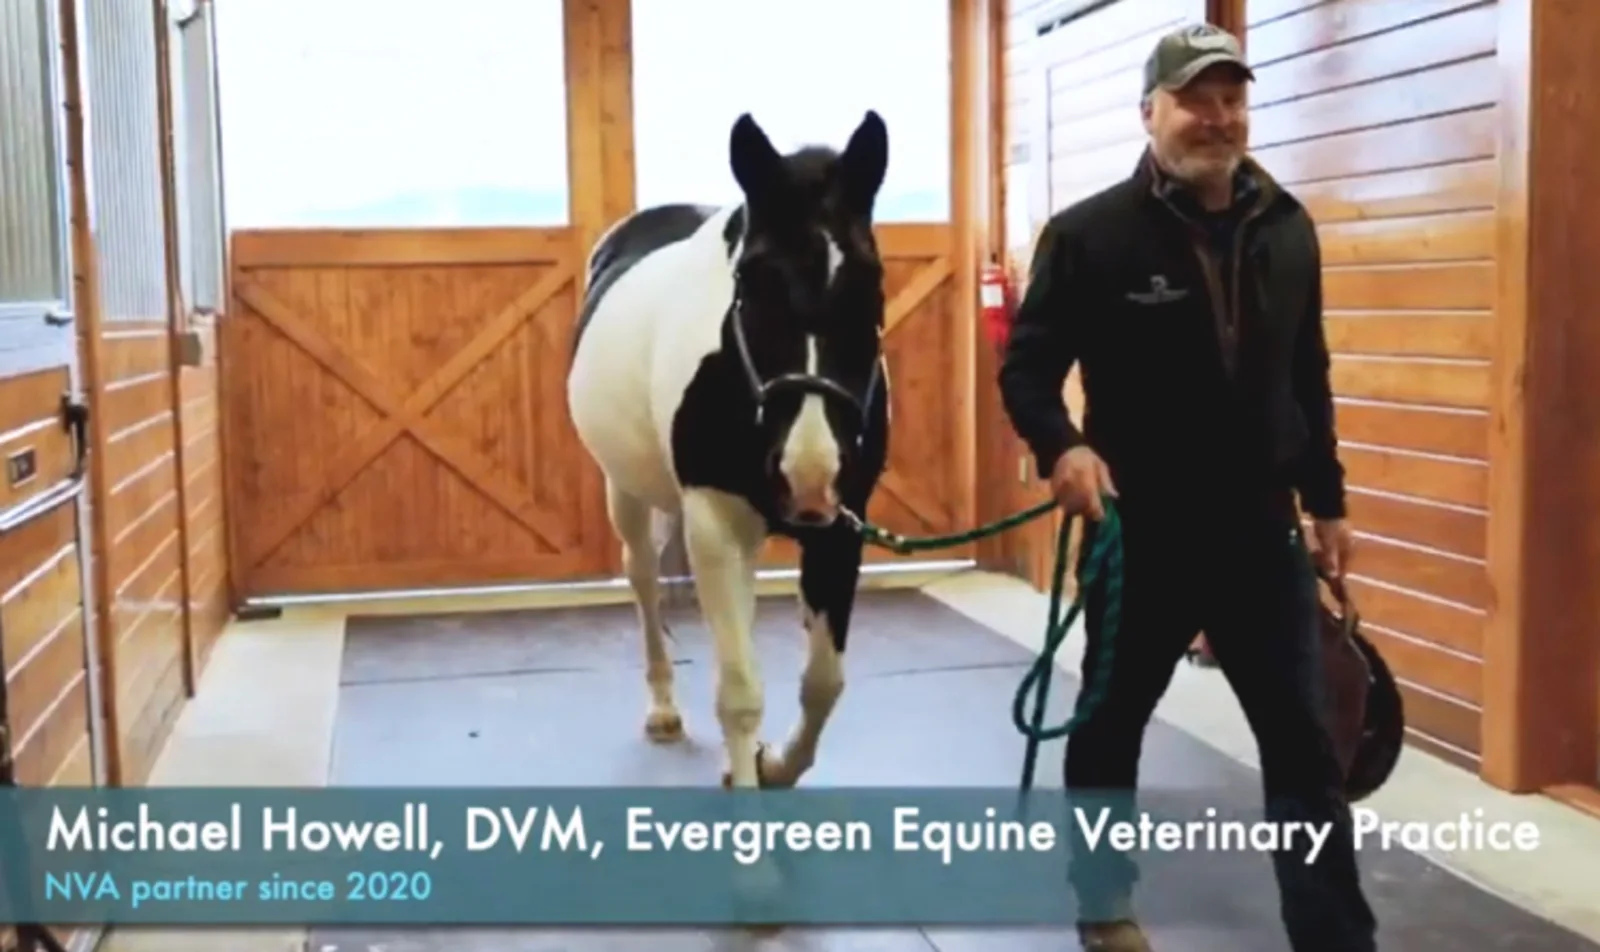 Michael Howell at Evergreen Equine Veterinary Practice